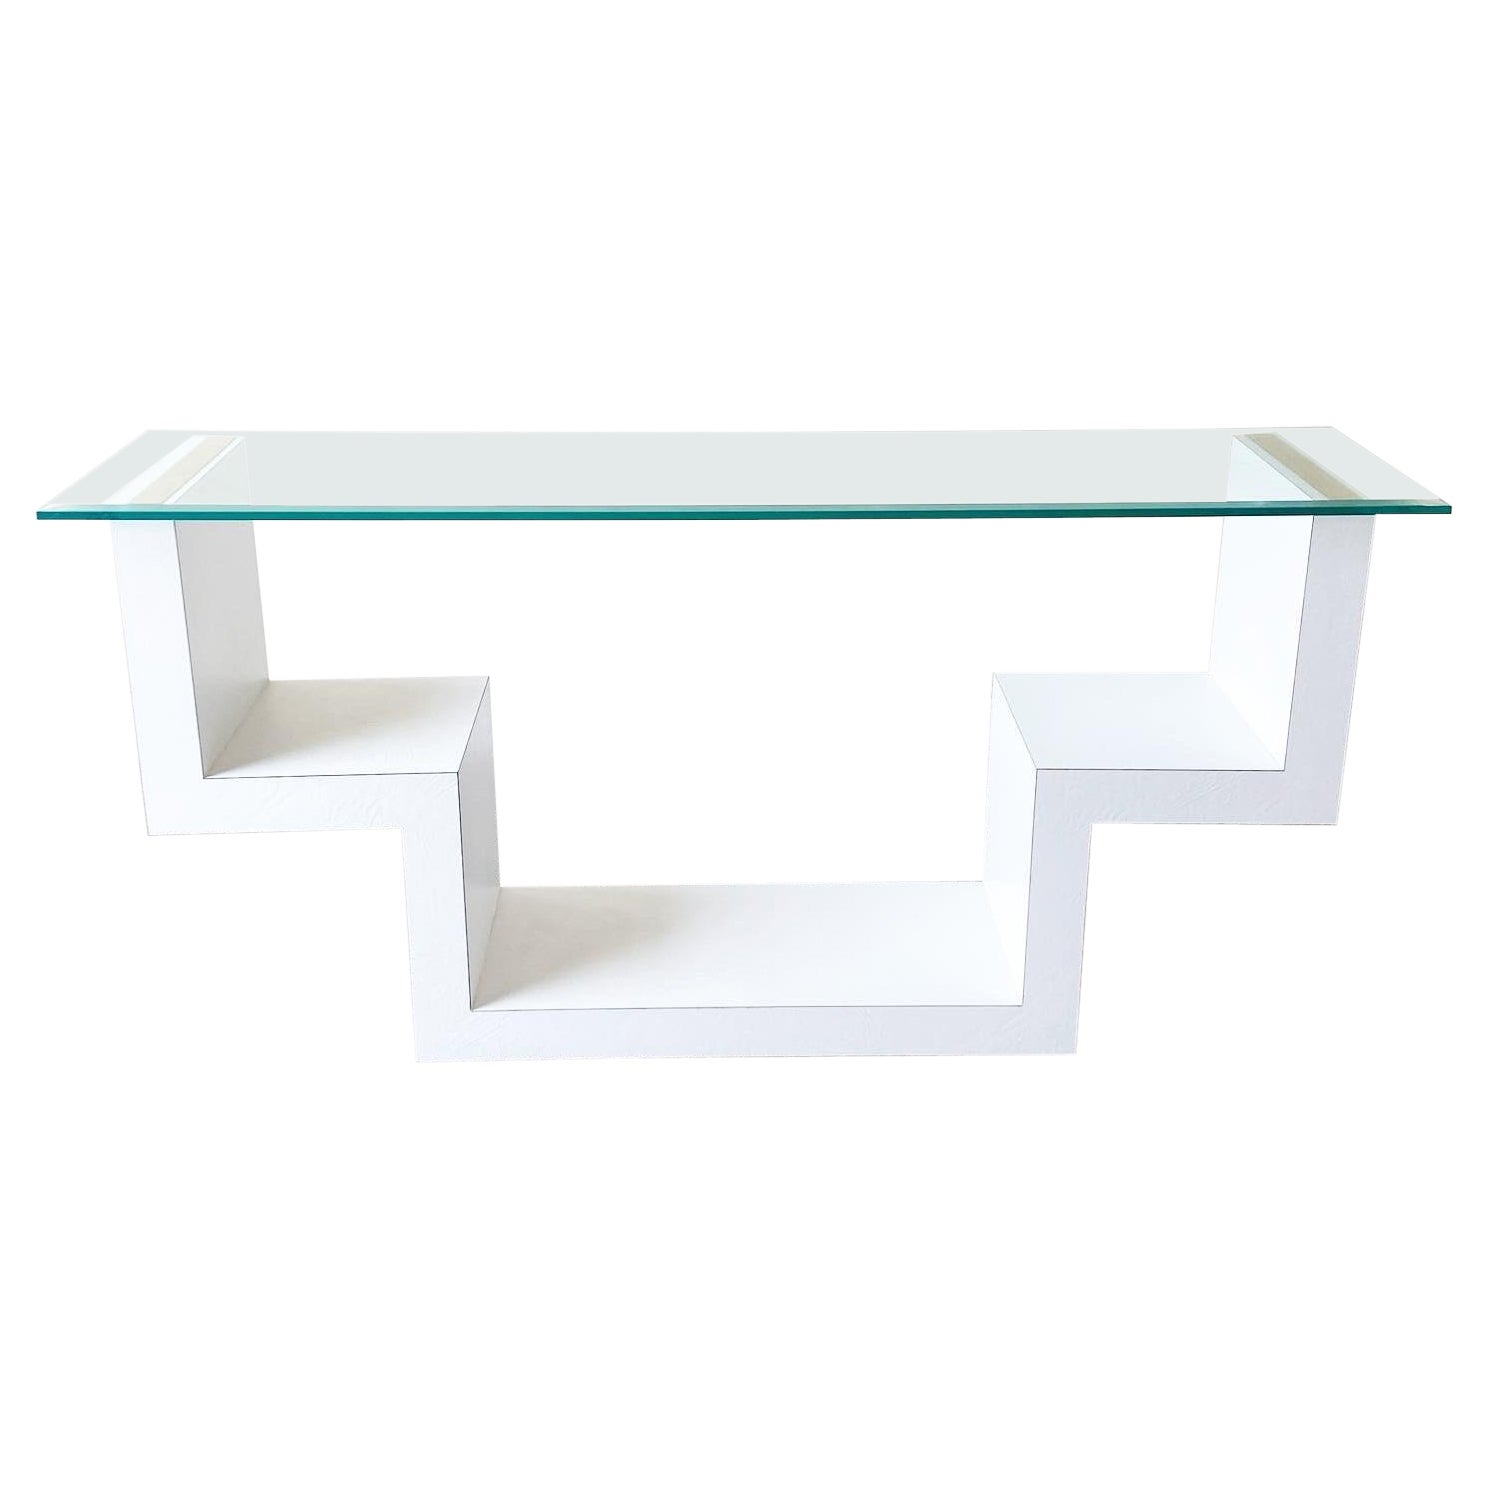 1980s Postmodern White Faux Leather Laminate Glass Top Console Table For Sale